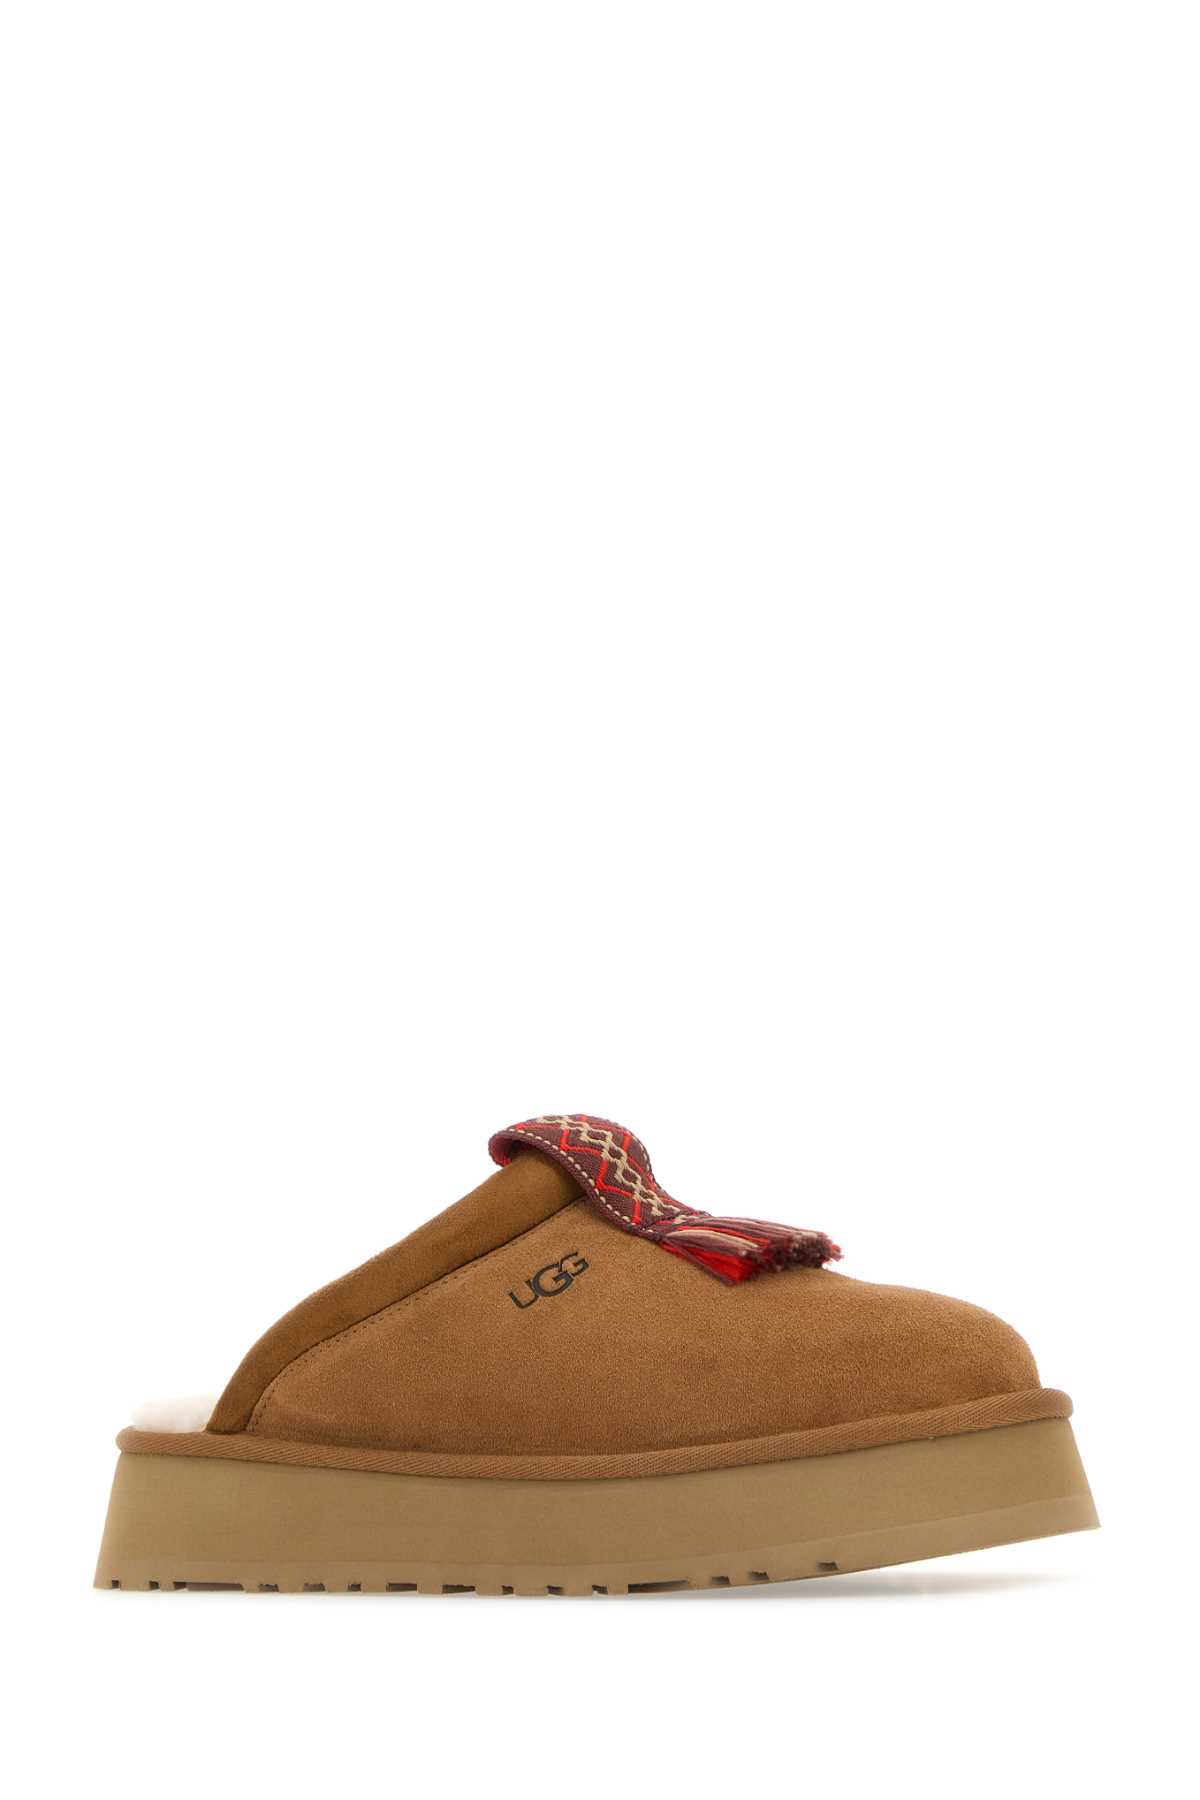 Shop Ugg Camel Suede Tazzle Slippers In Chestnut